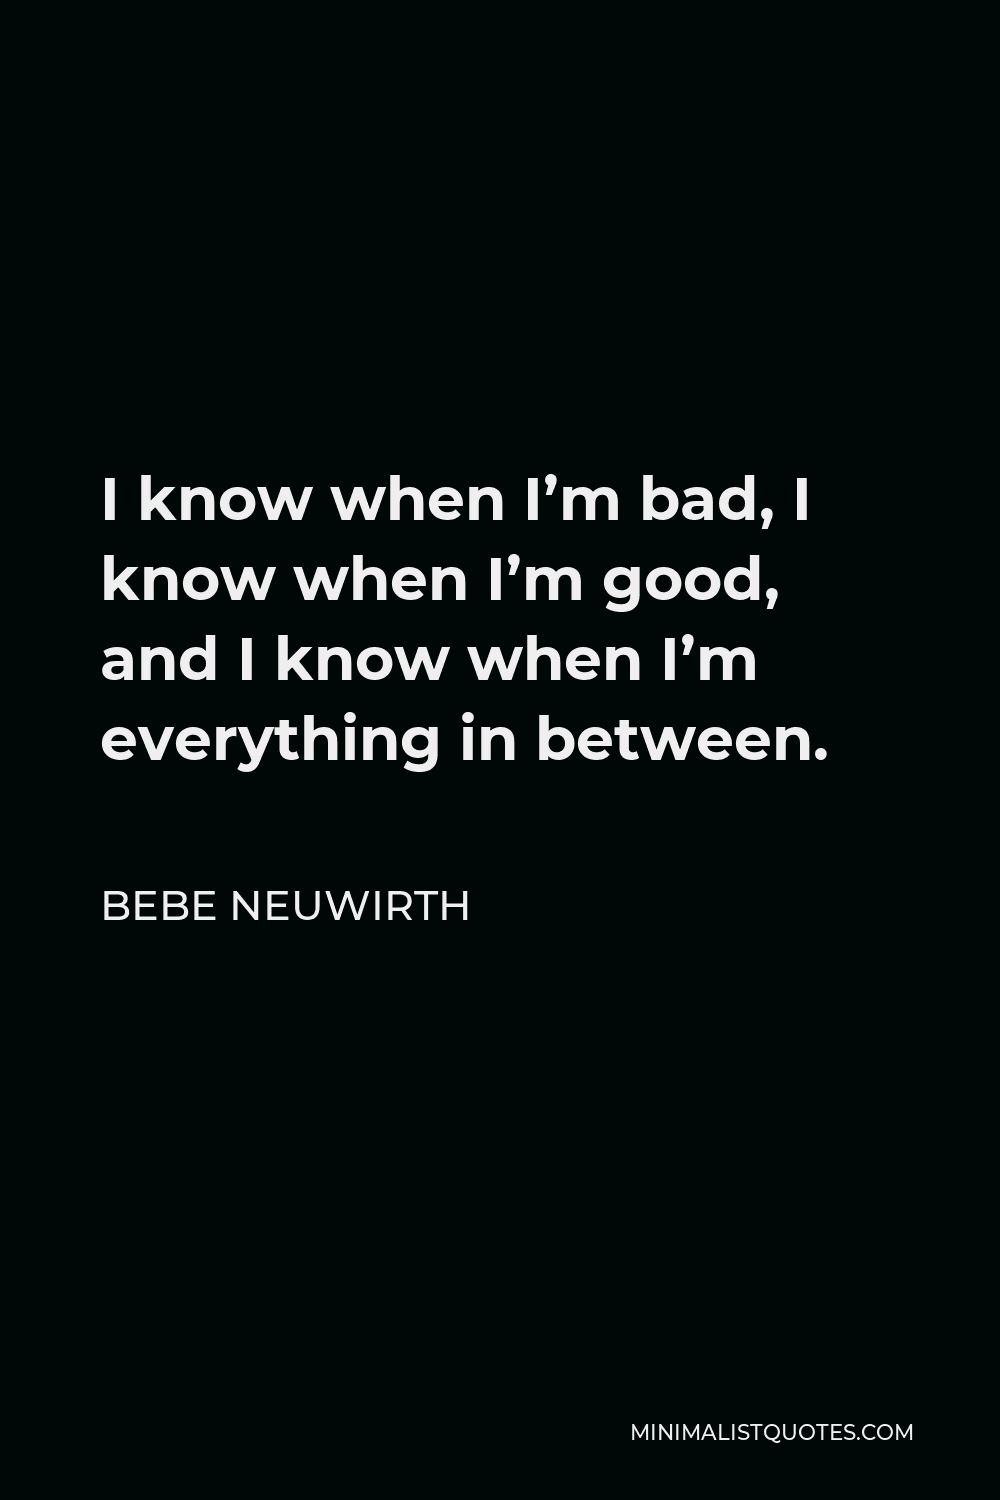 Bebe Neuwirth Quote - I know when I’m bad, I know when I’m good, and I know when I’m everything in between.